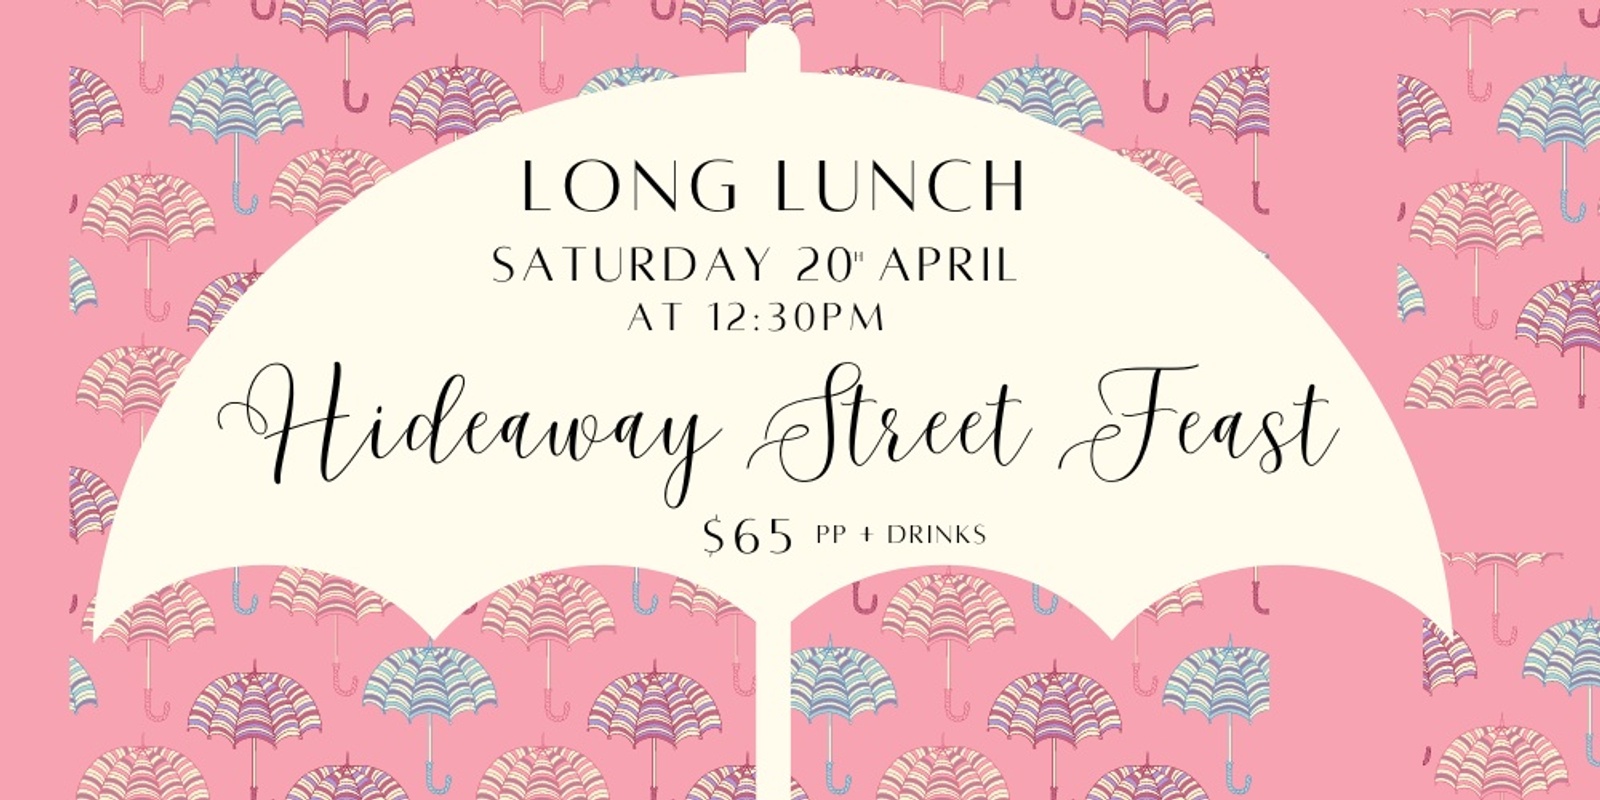 Banner image for Ladies Who Lunch RSVP confirmation